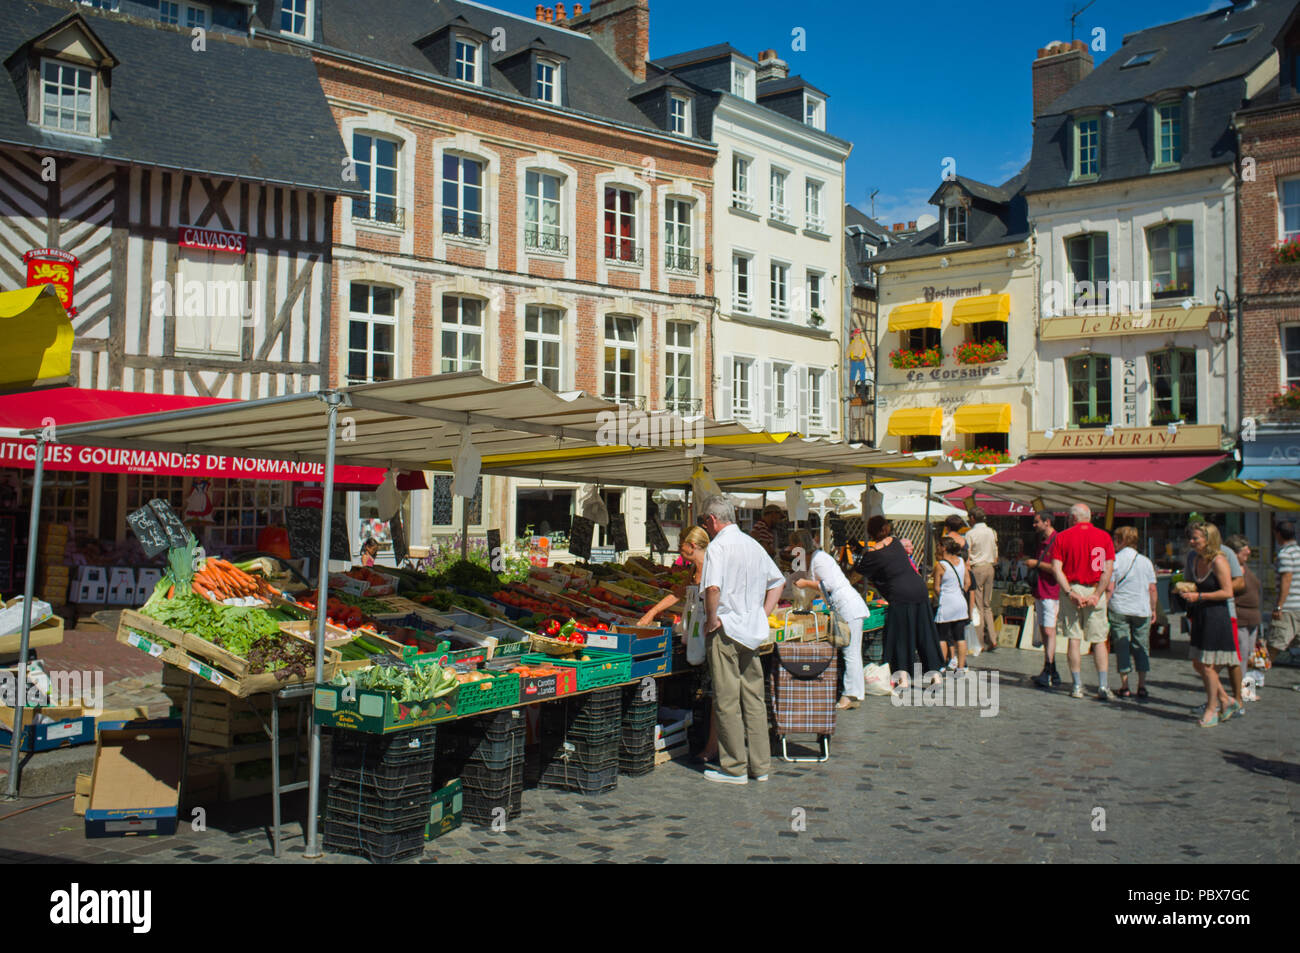 St. Catherine's Place on Market day in Honfleur, Normandy, France Stock Photo